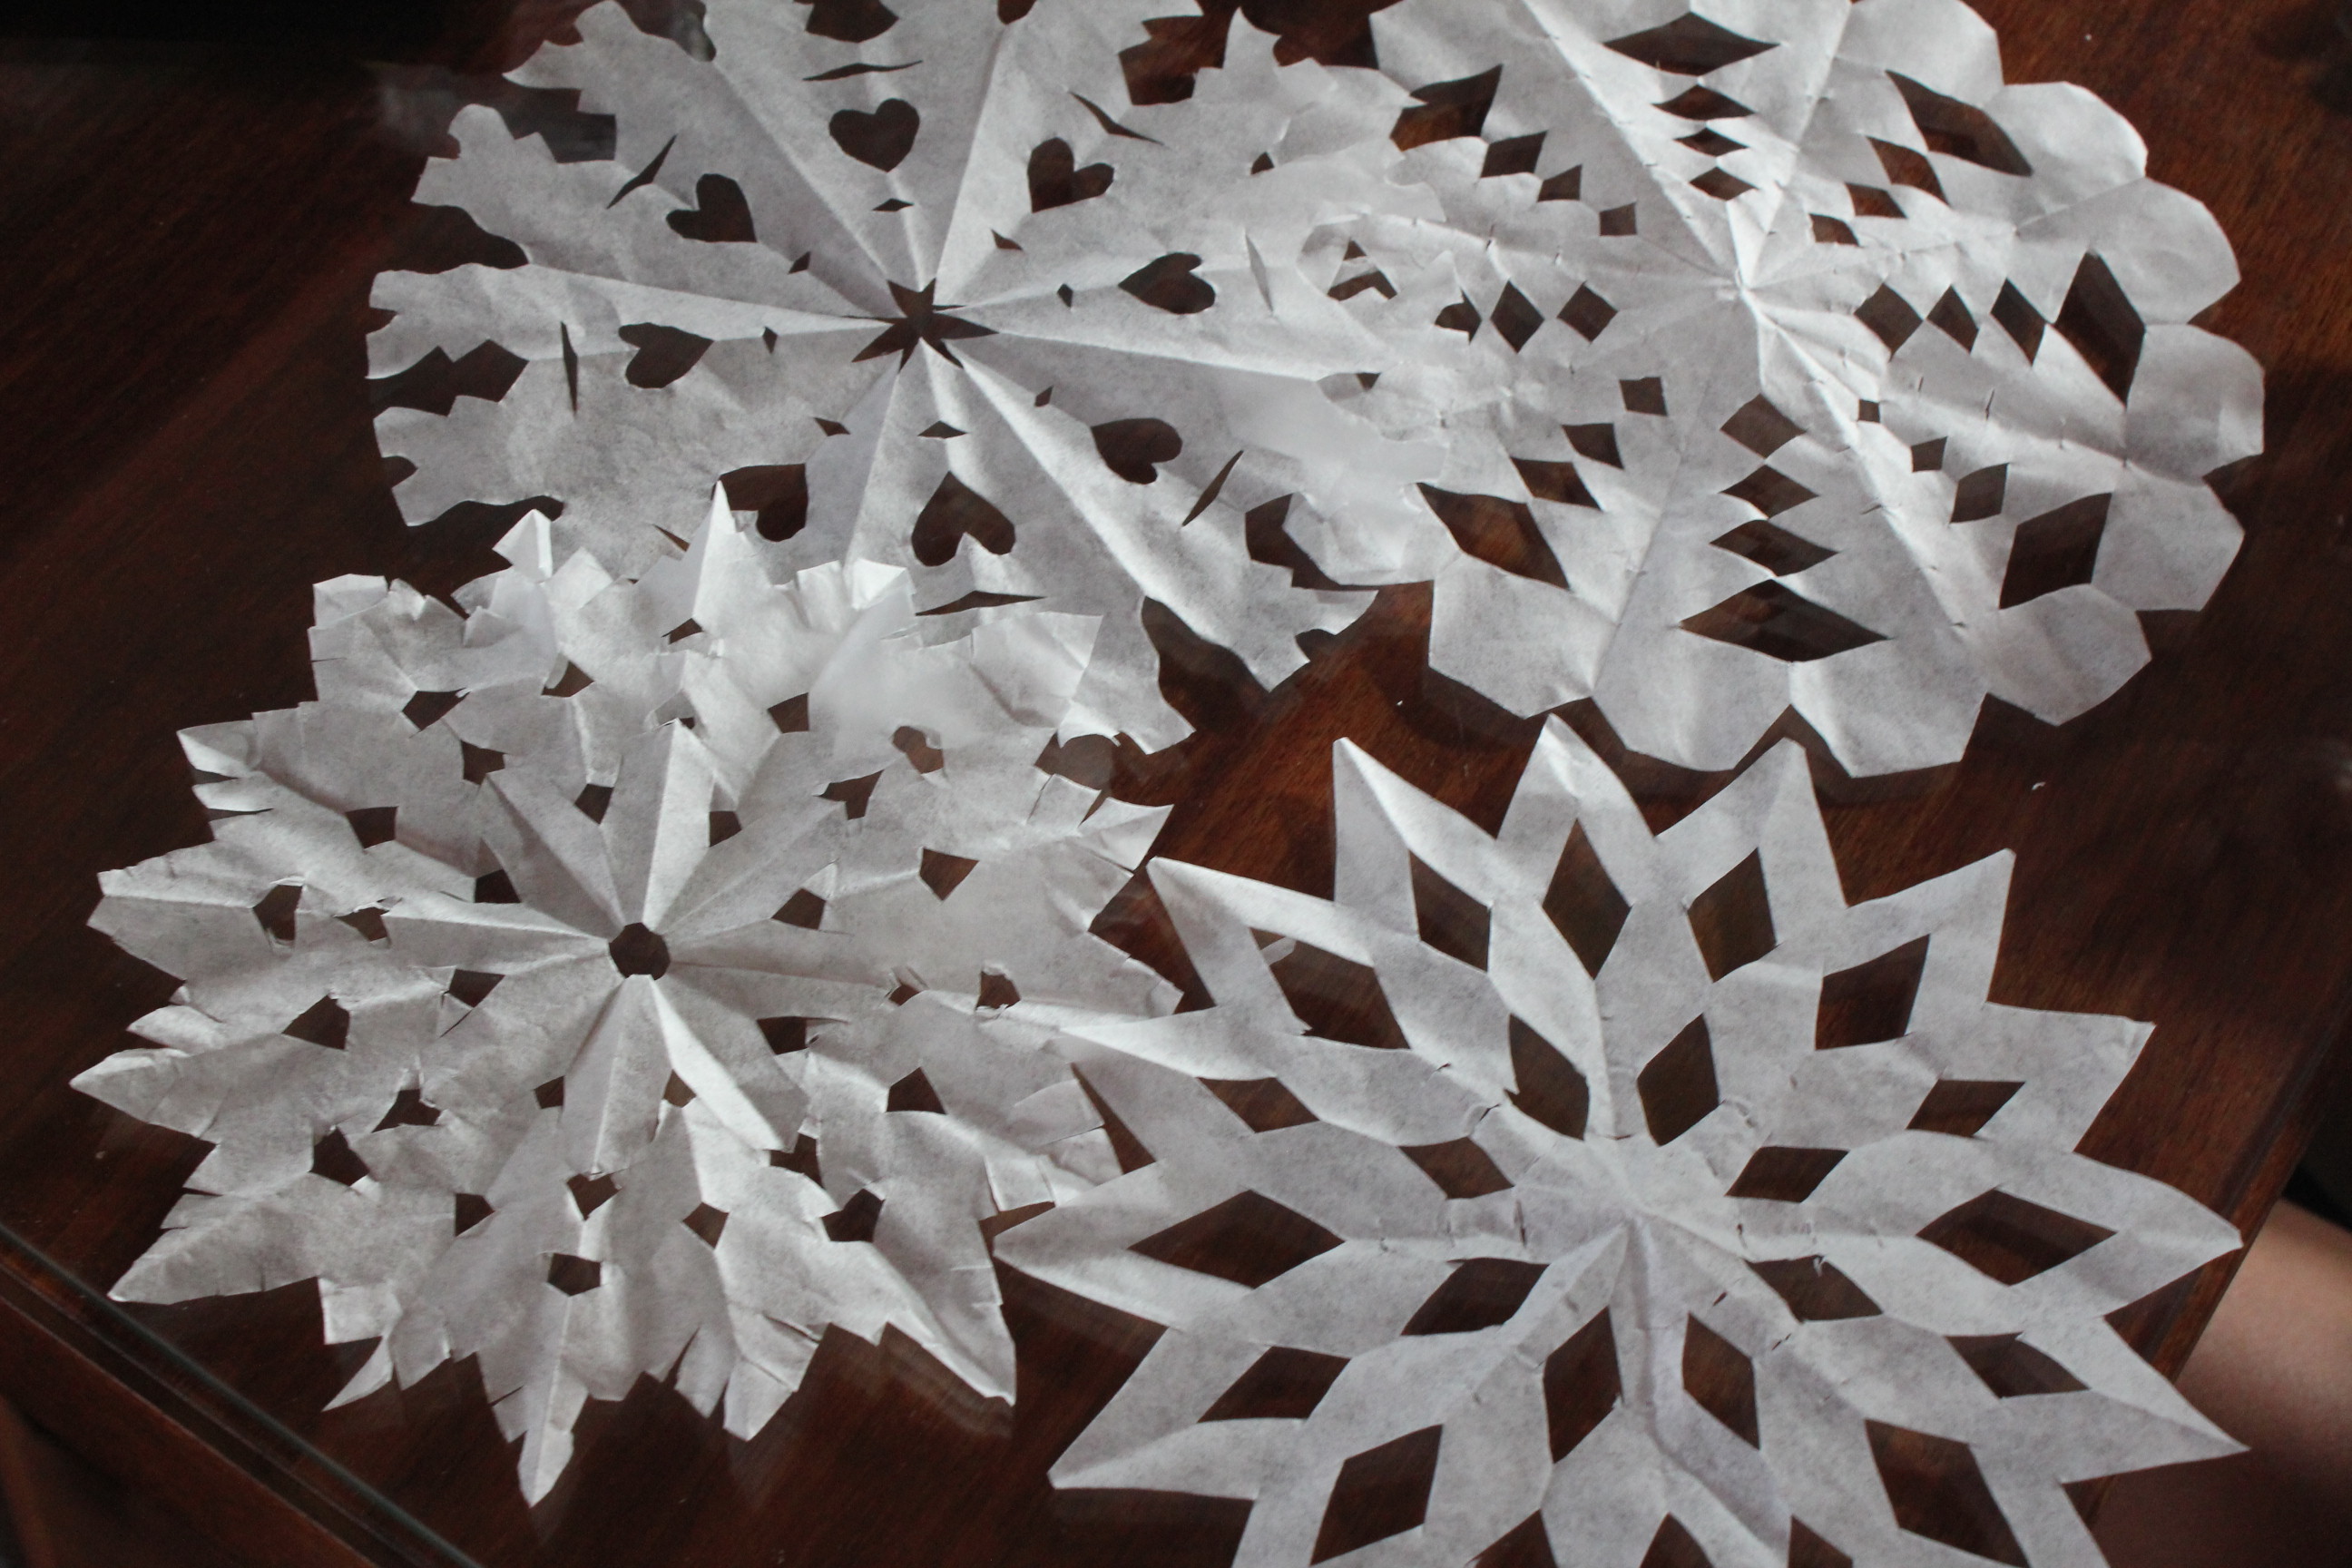 how to make snowflakes from coffee filters